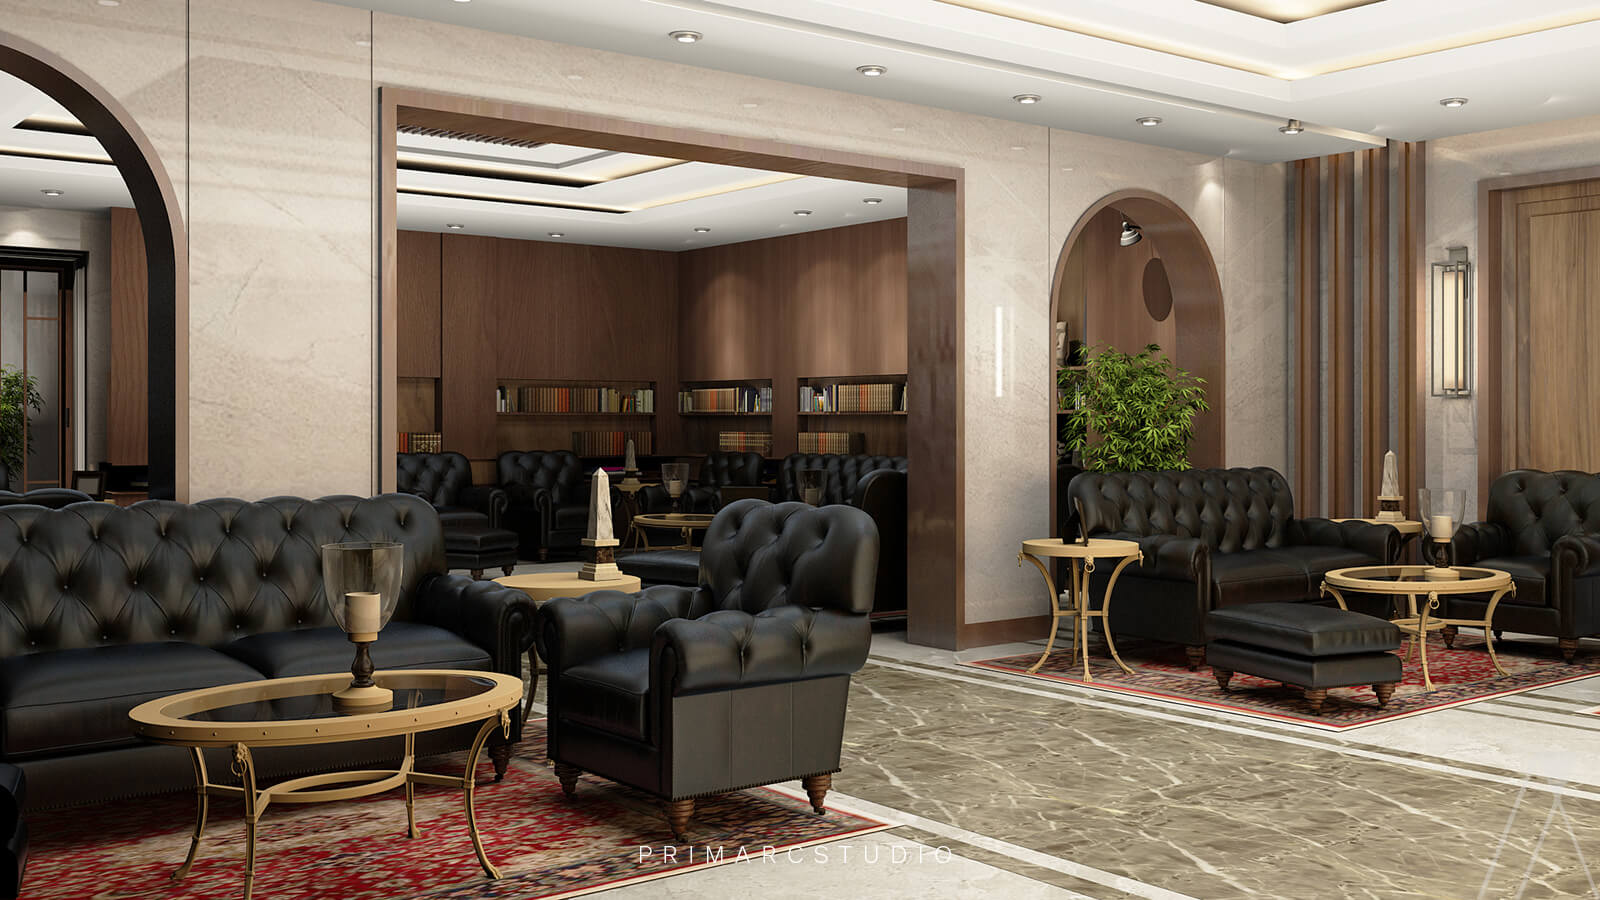 Golf Course lounge interior design with sitting areas.